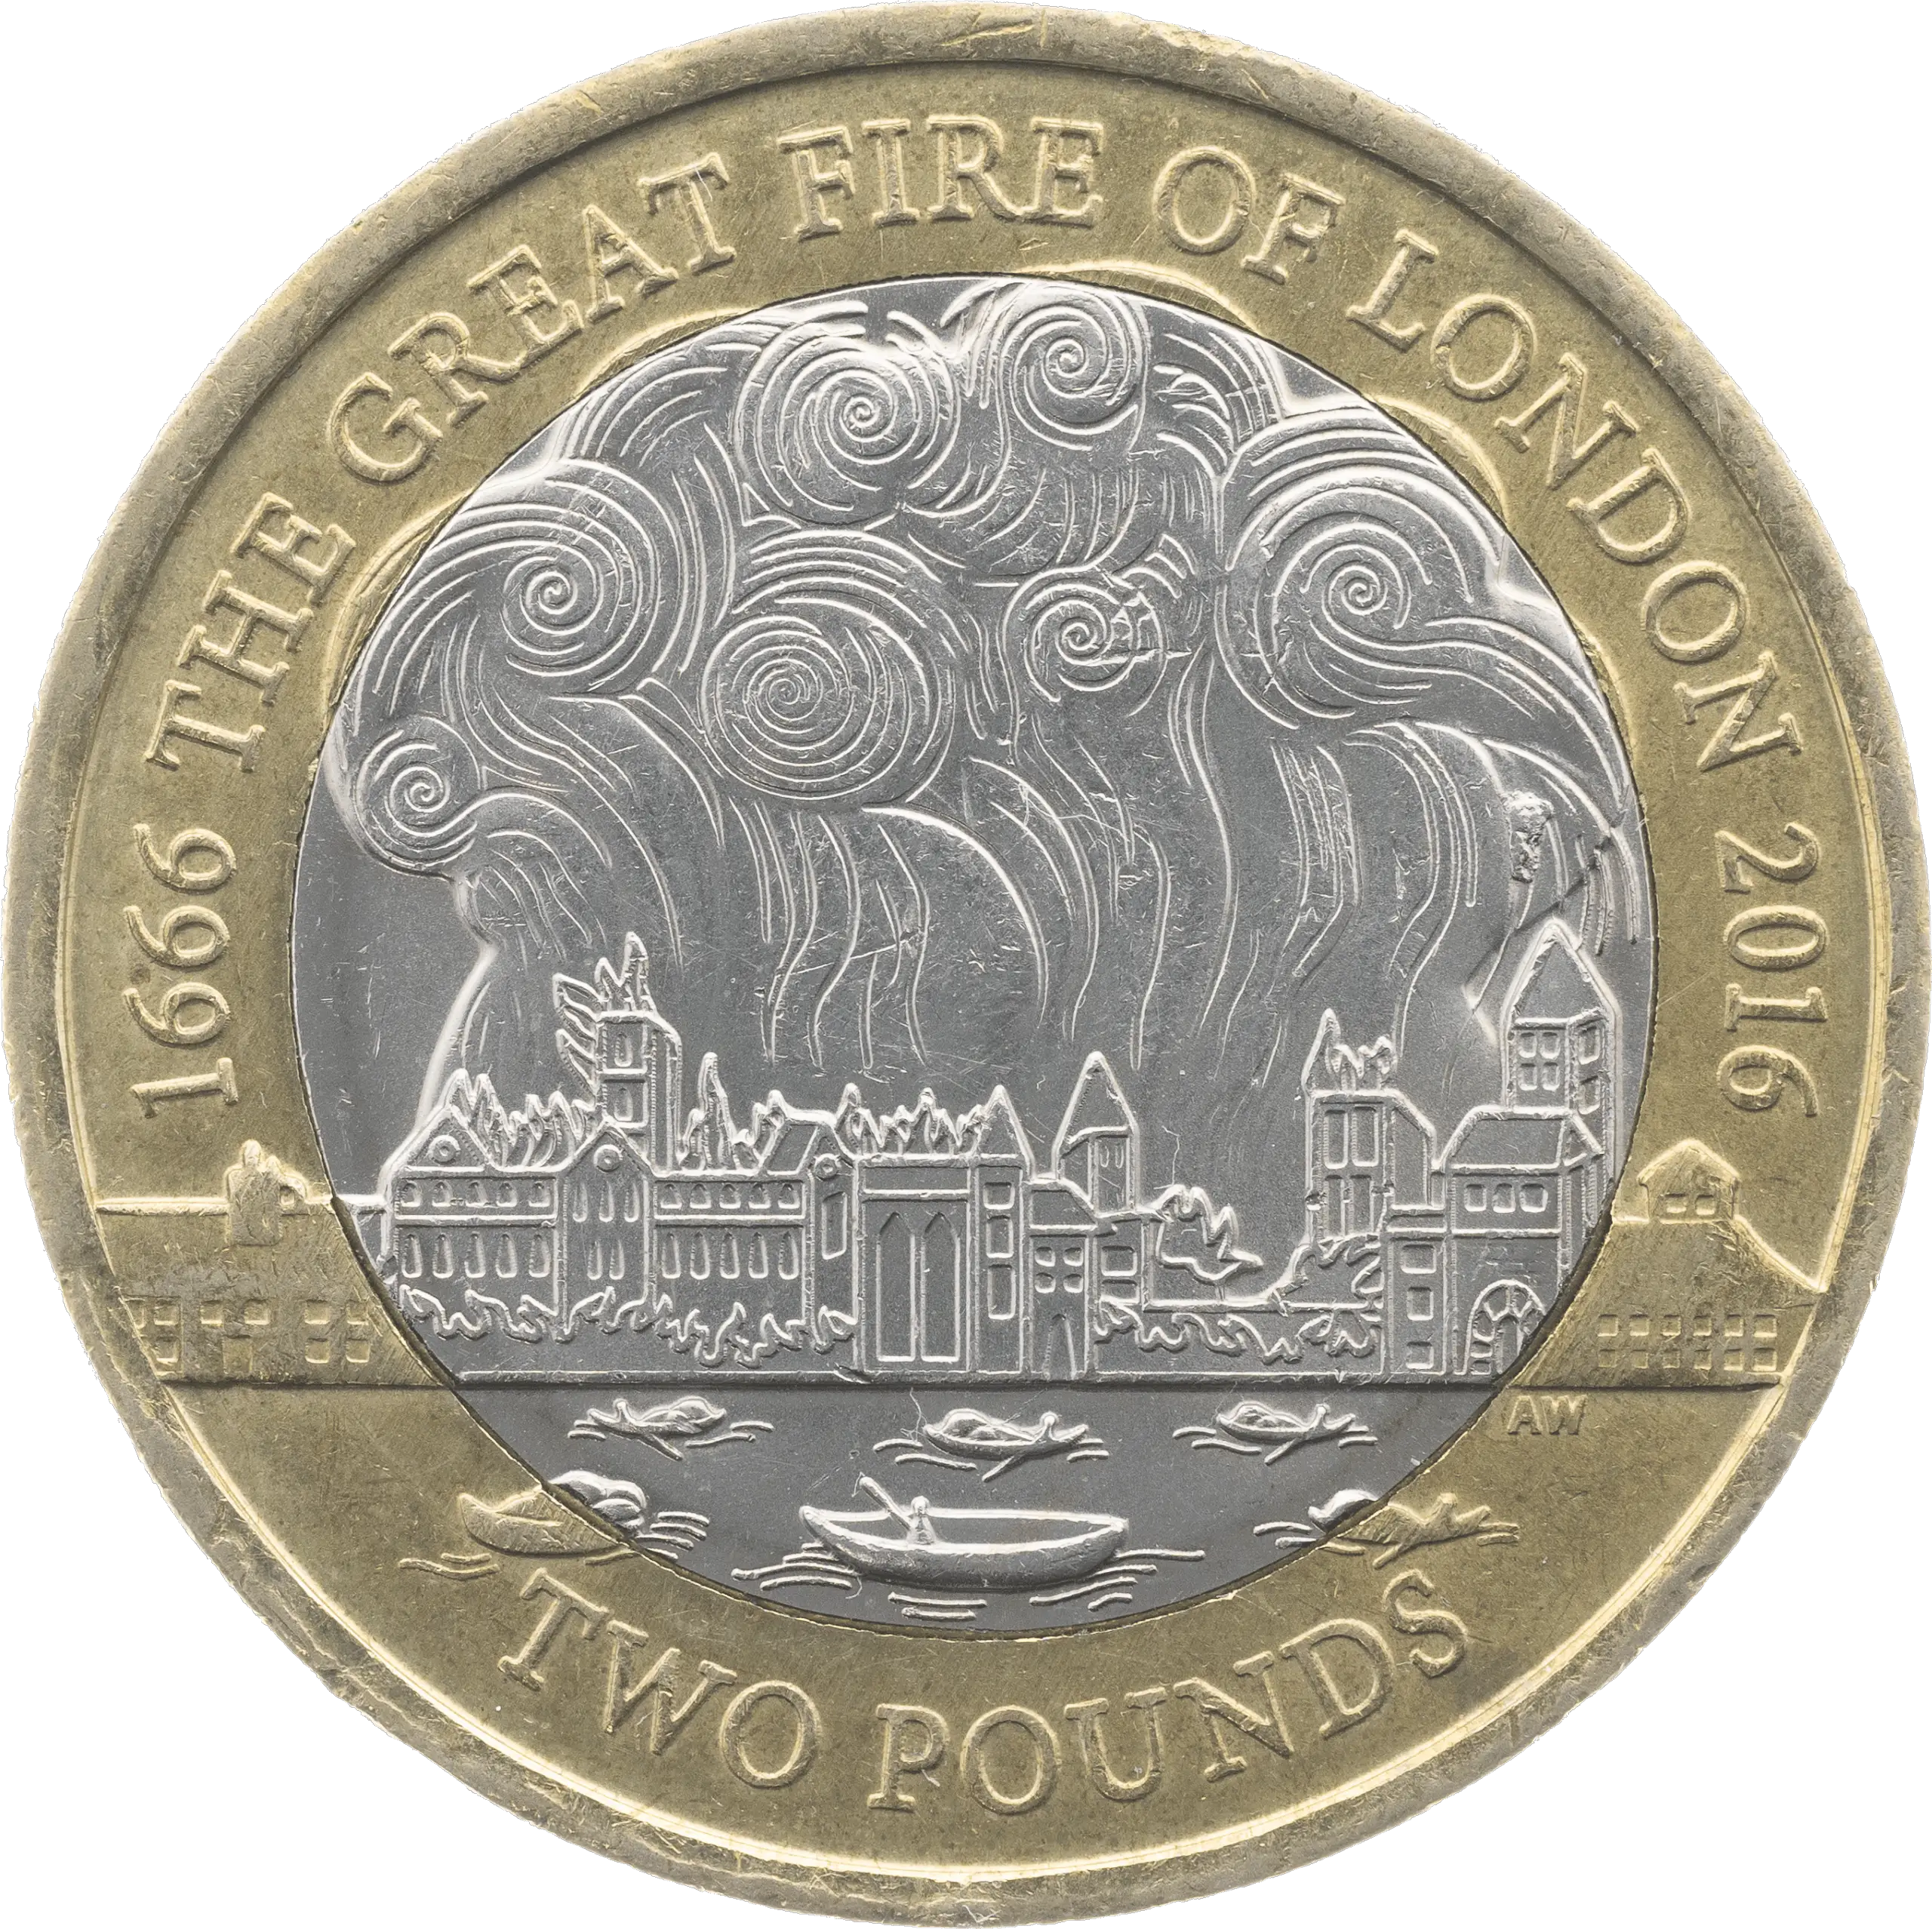 Great Fire of London £2 Coin